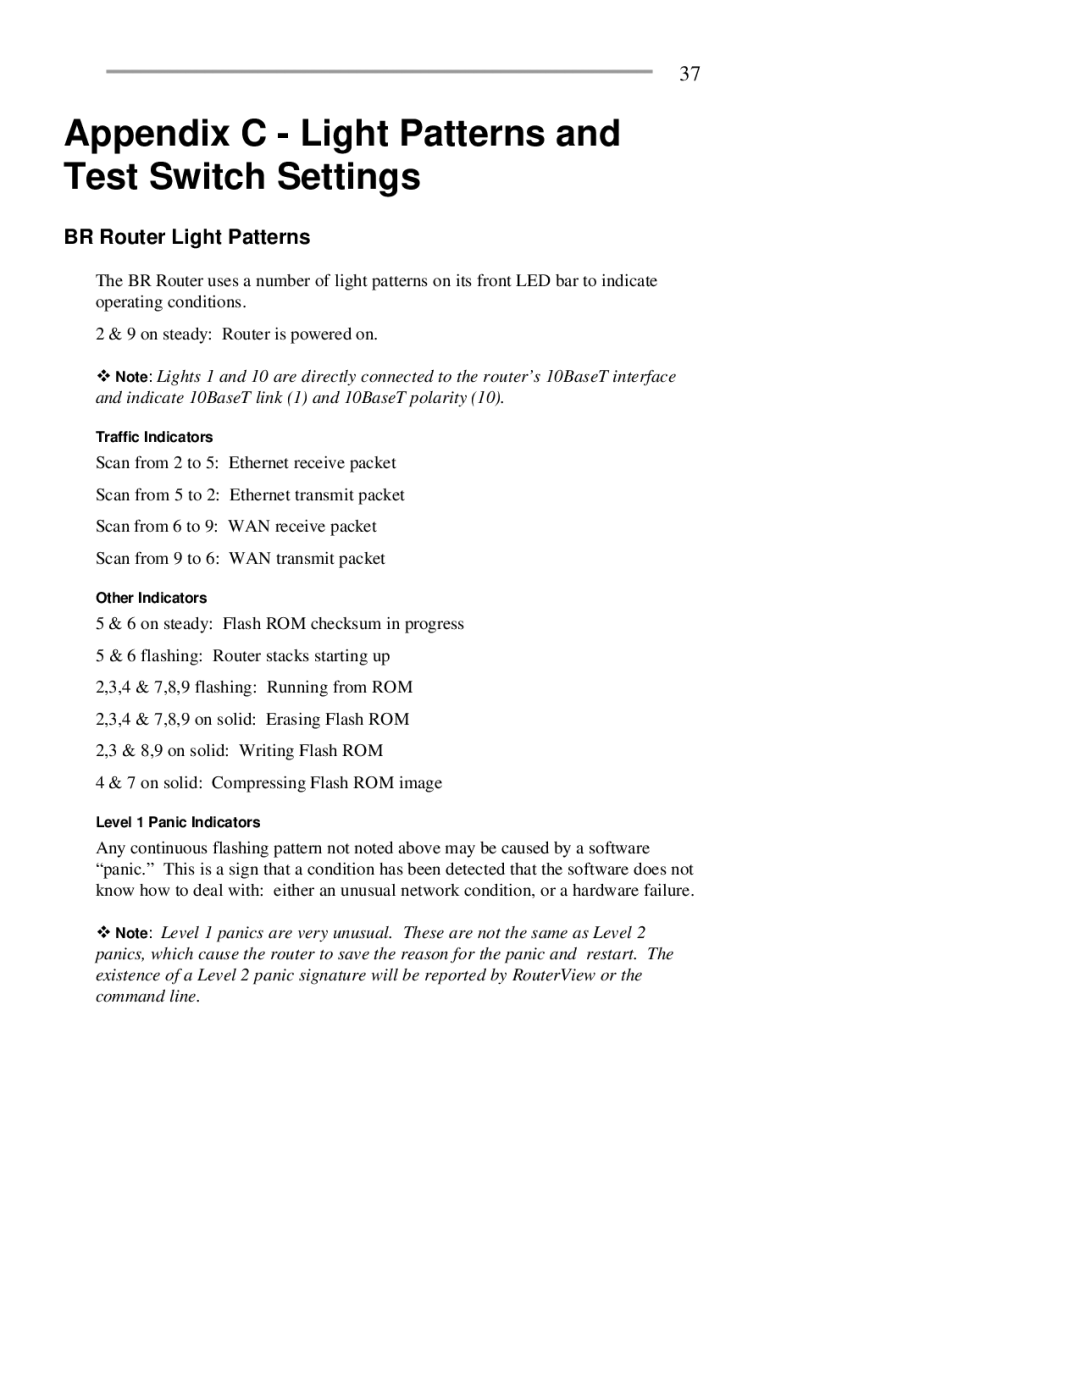 RAD Data comm BR-ASX01, BR-ASI01 manual Appendix C Light Patterns and Test Switch Settings, BR Router Light Patterns 